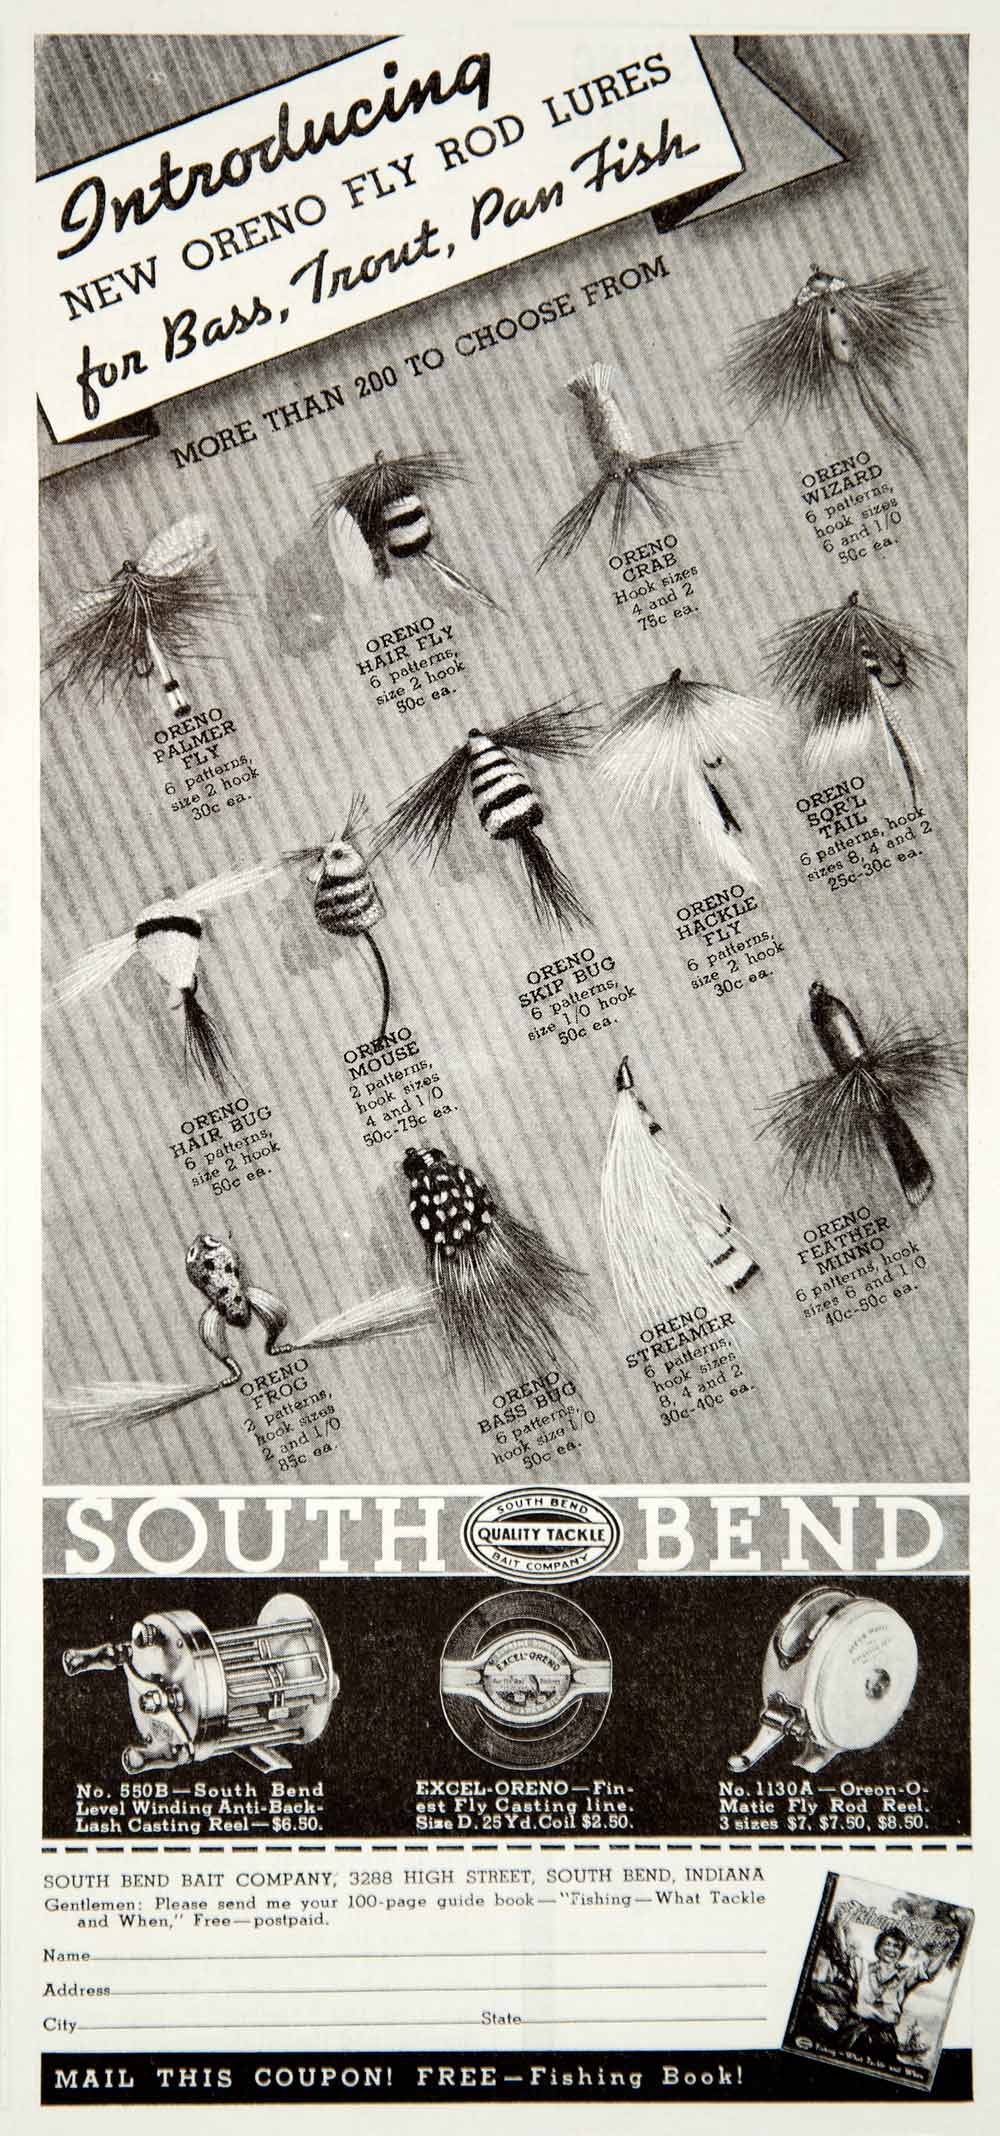 1934 Ad South Bend Fishing Rod Casting Line Lure Bait Tackle 6272